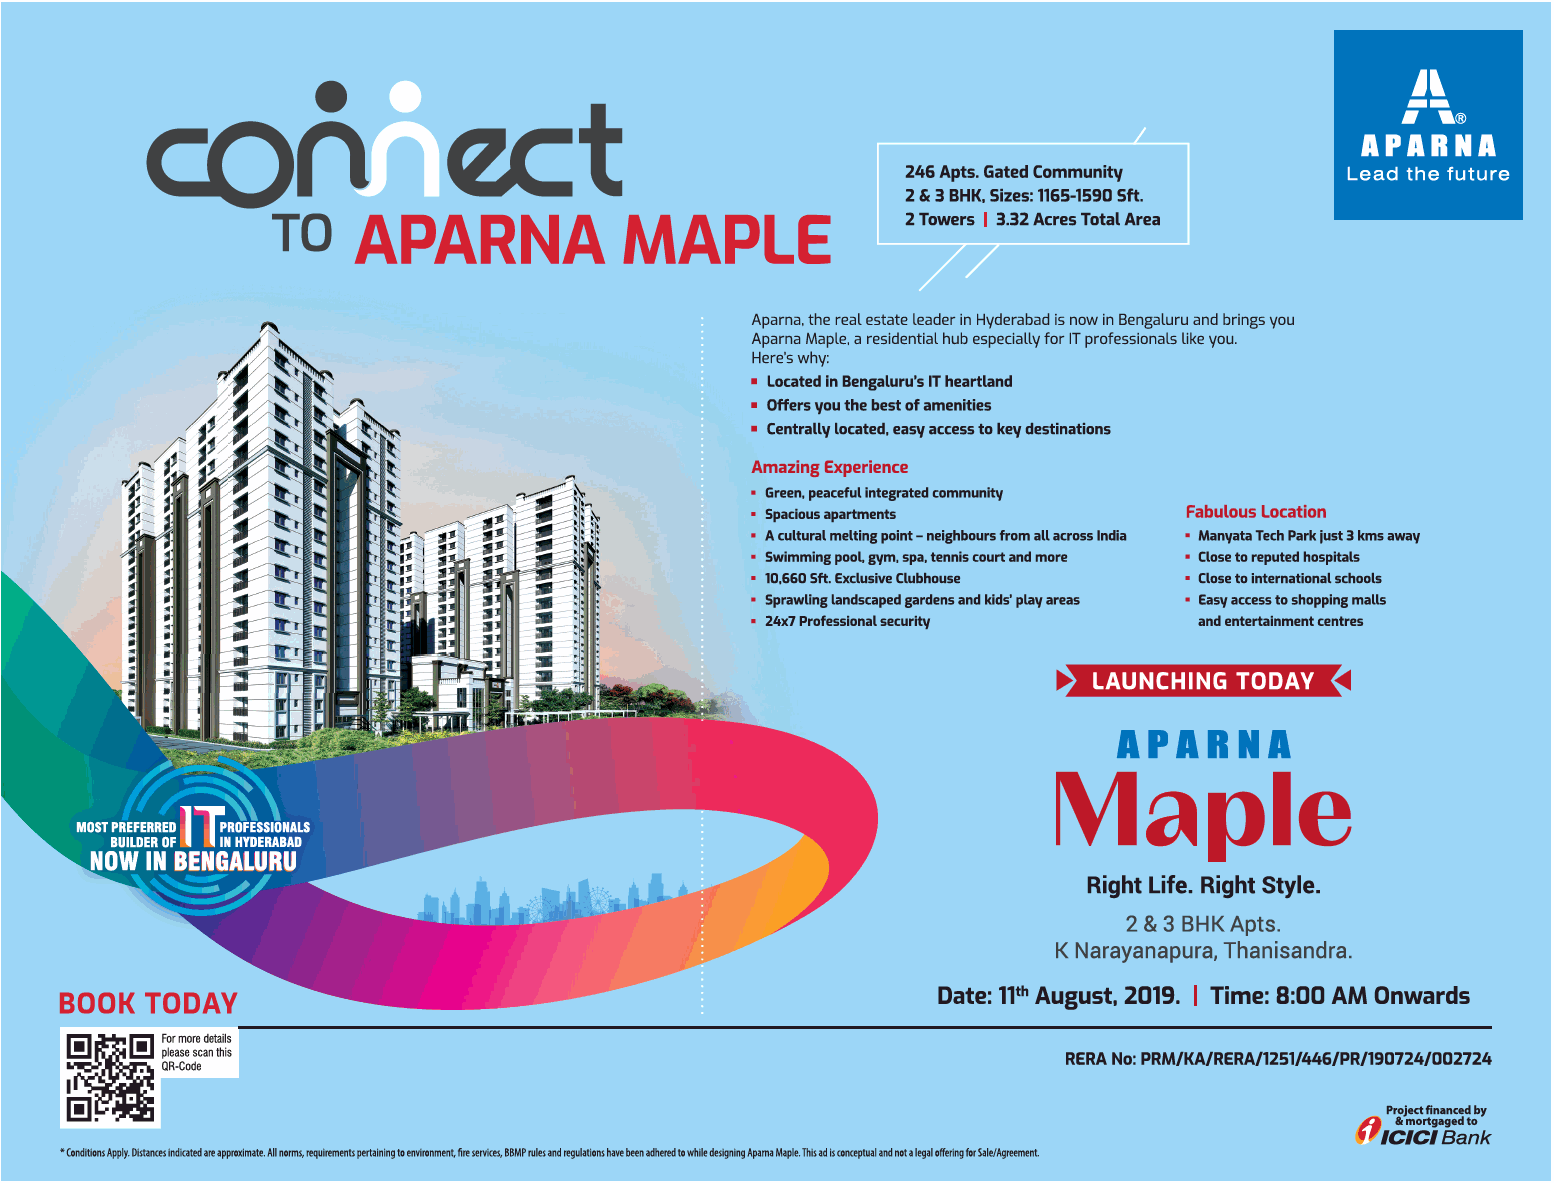 Launching today now  at Aparna Maple in Bangalore Update